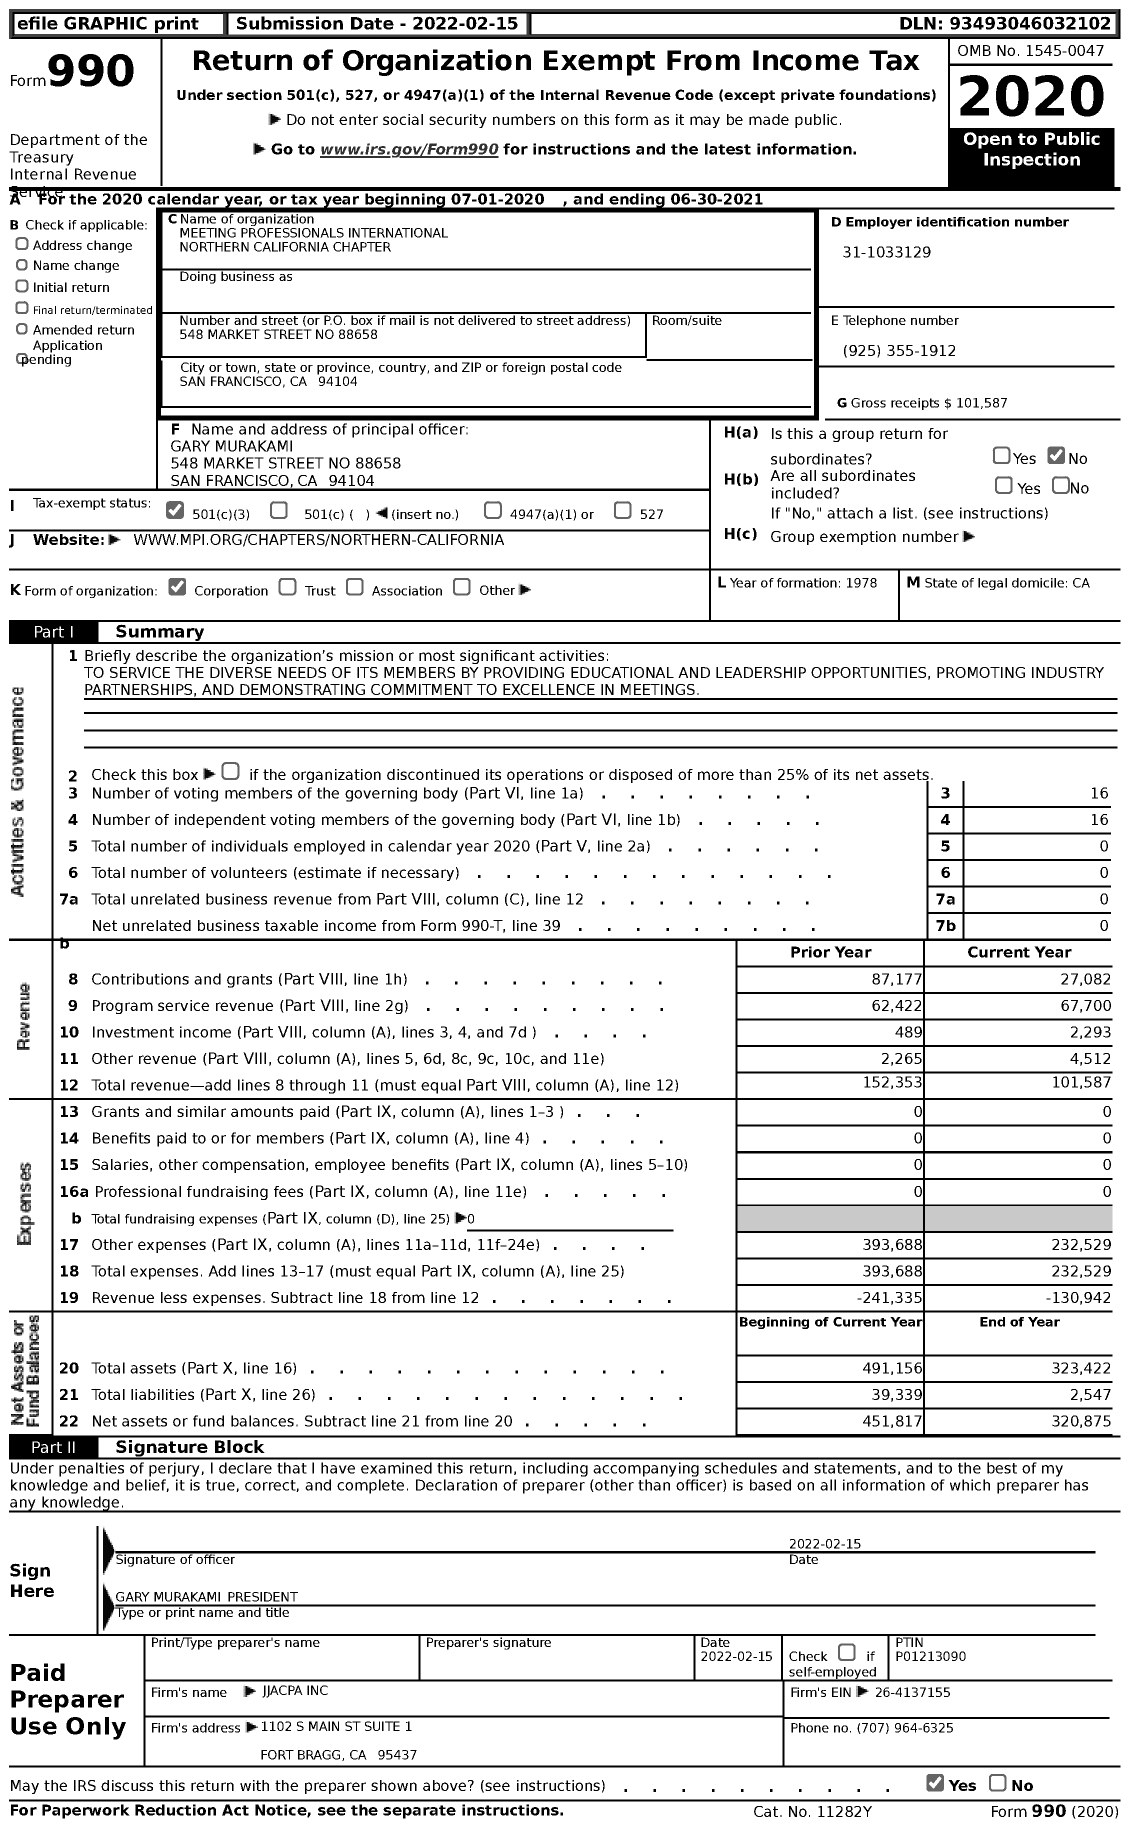 Image of first page of 2020 Form 990 for Meeting Professionals International / Northern California